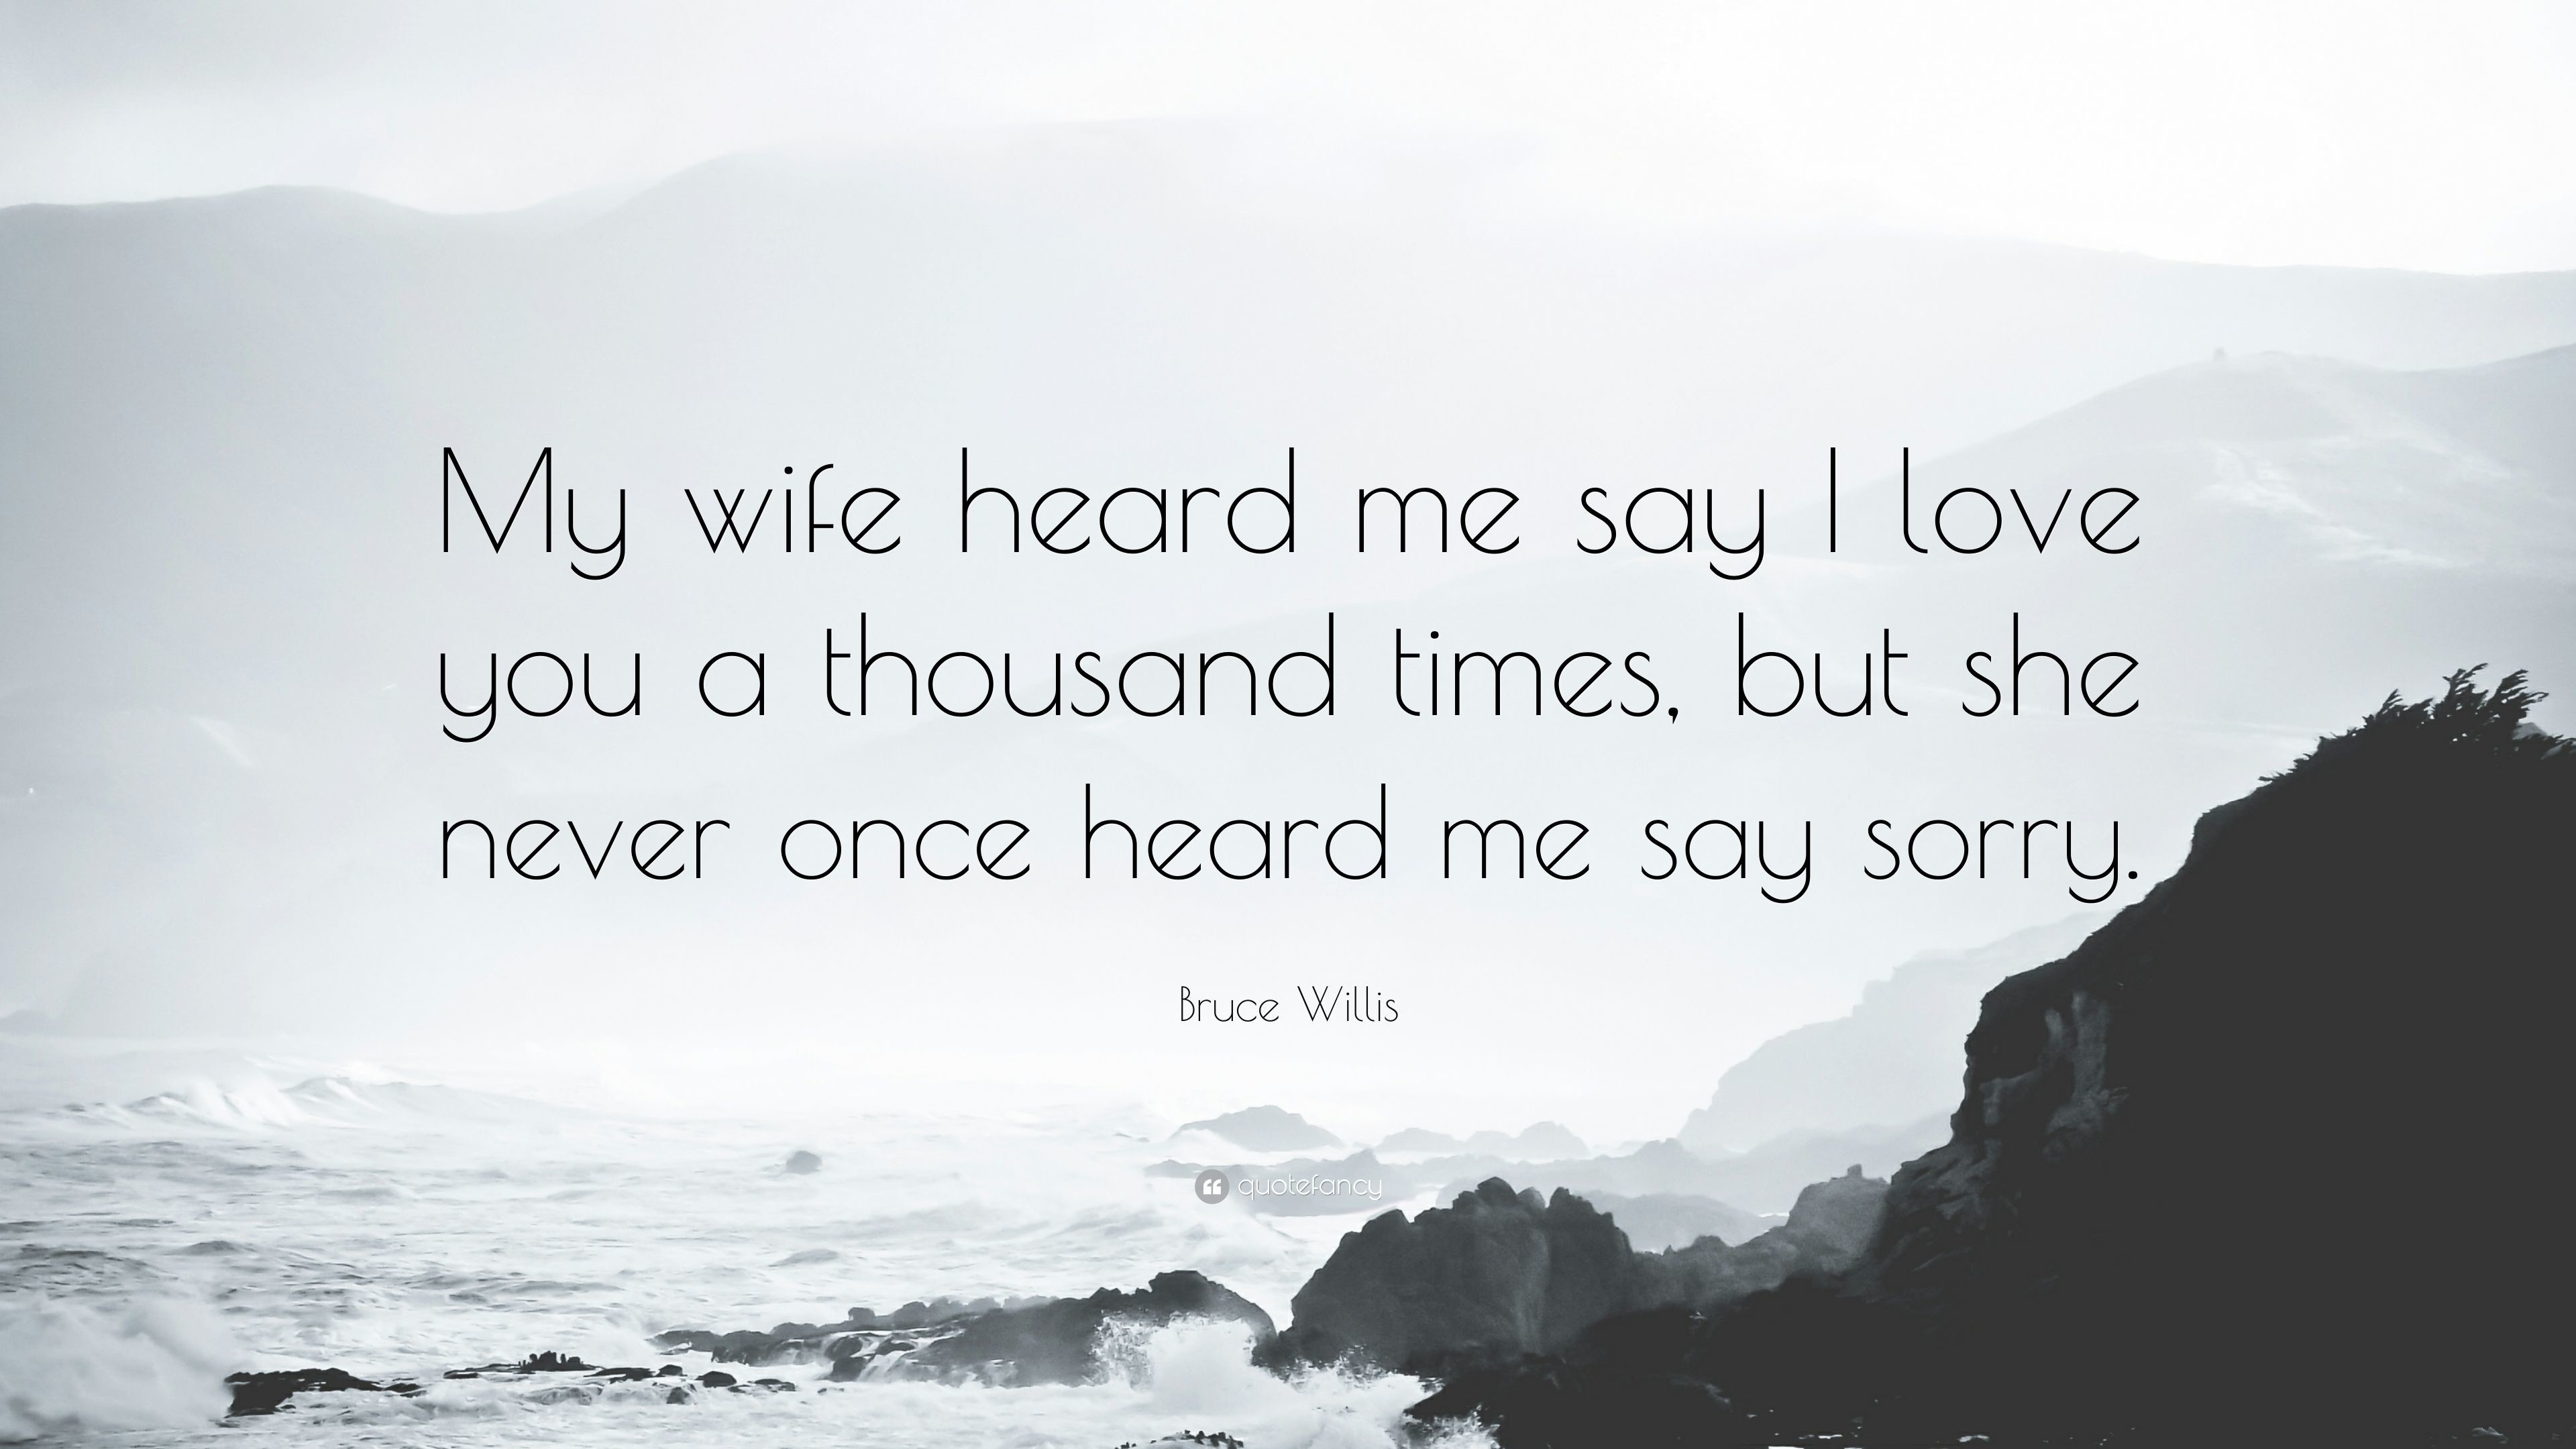 3840x2160 Bruce Willis Quote: “My wife heard me say I love you a thousand times